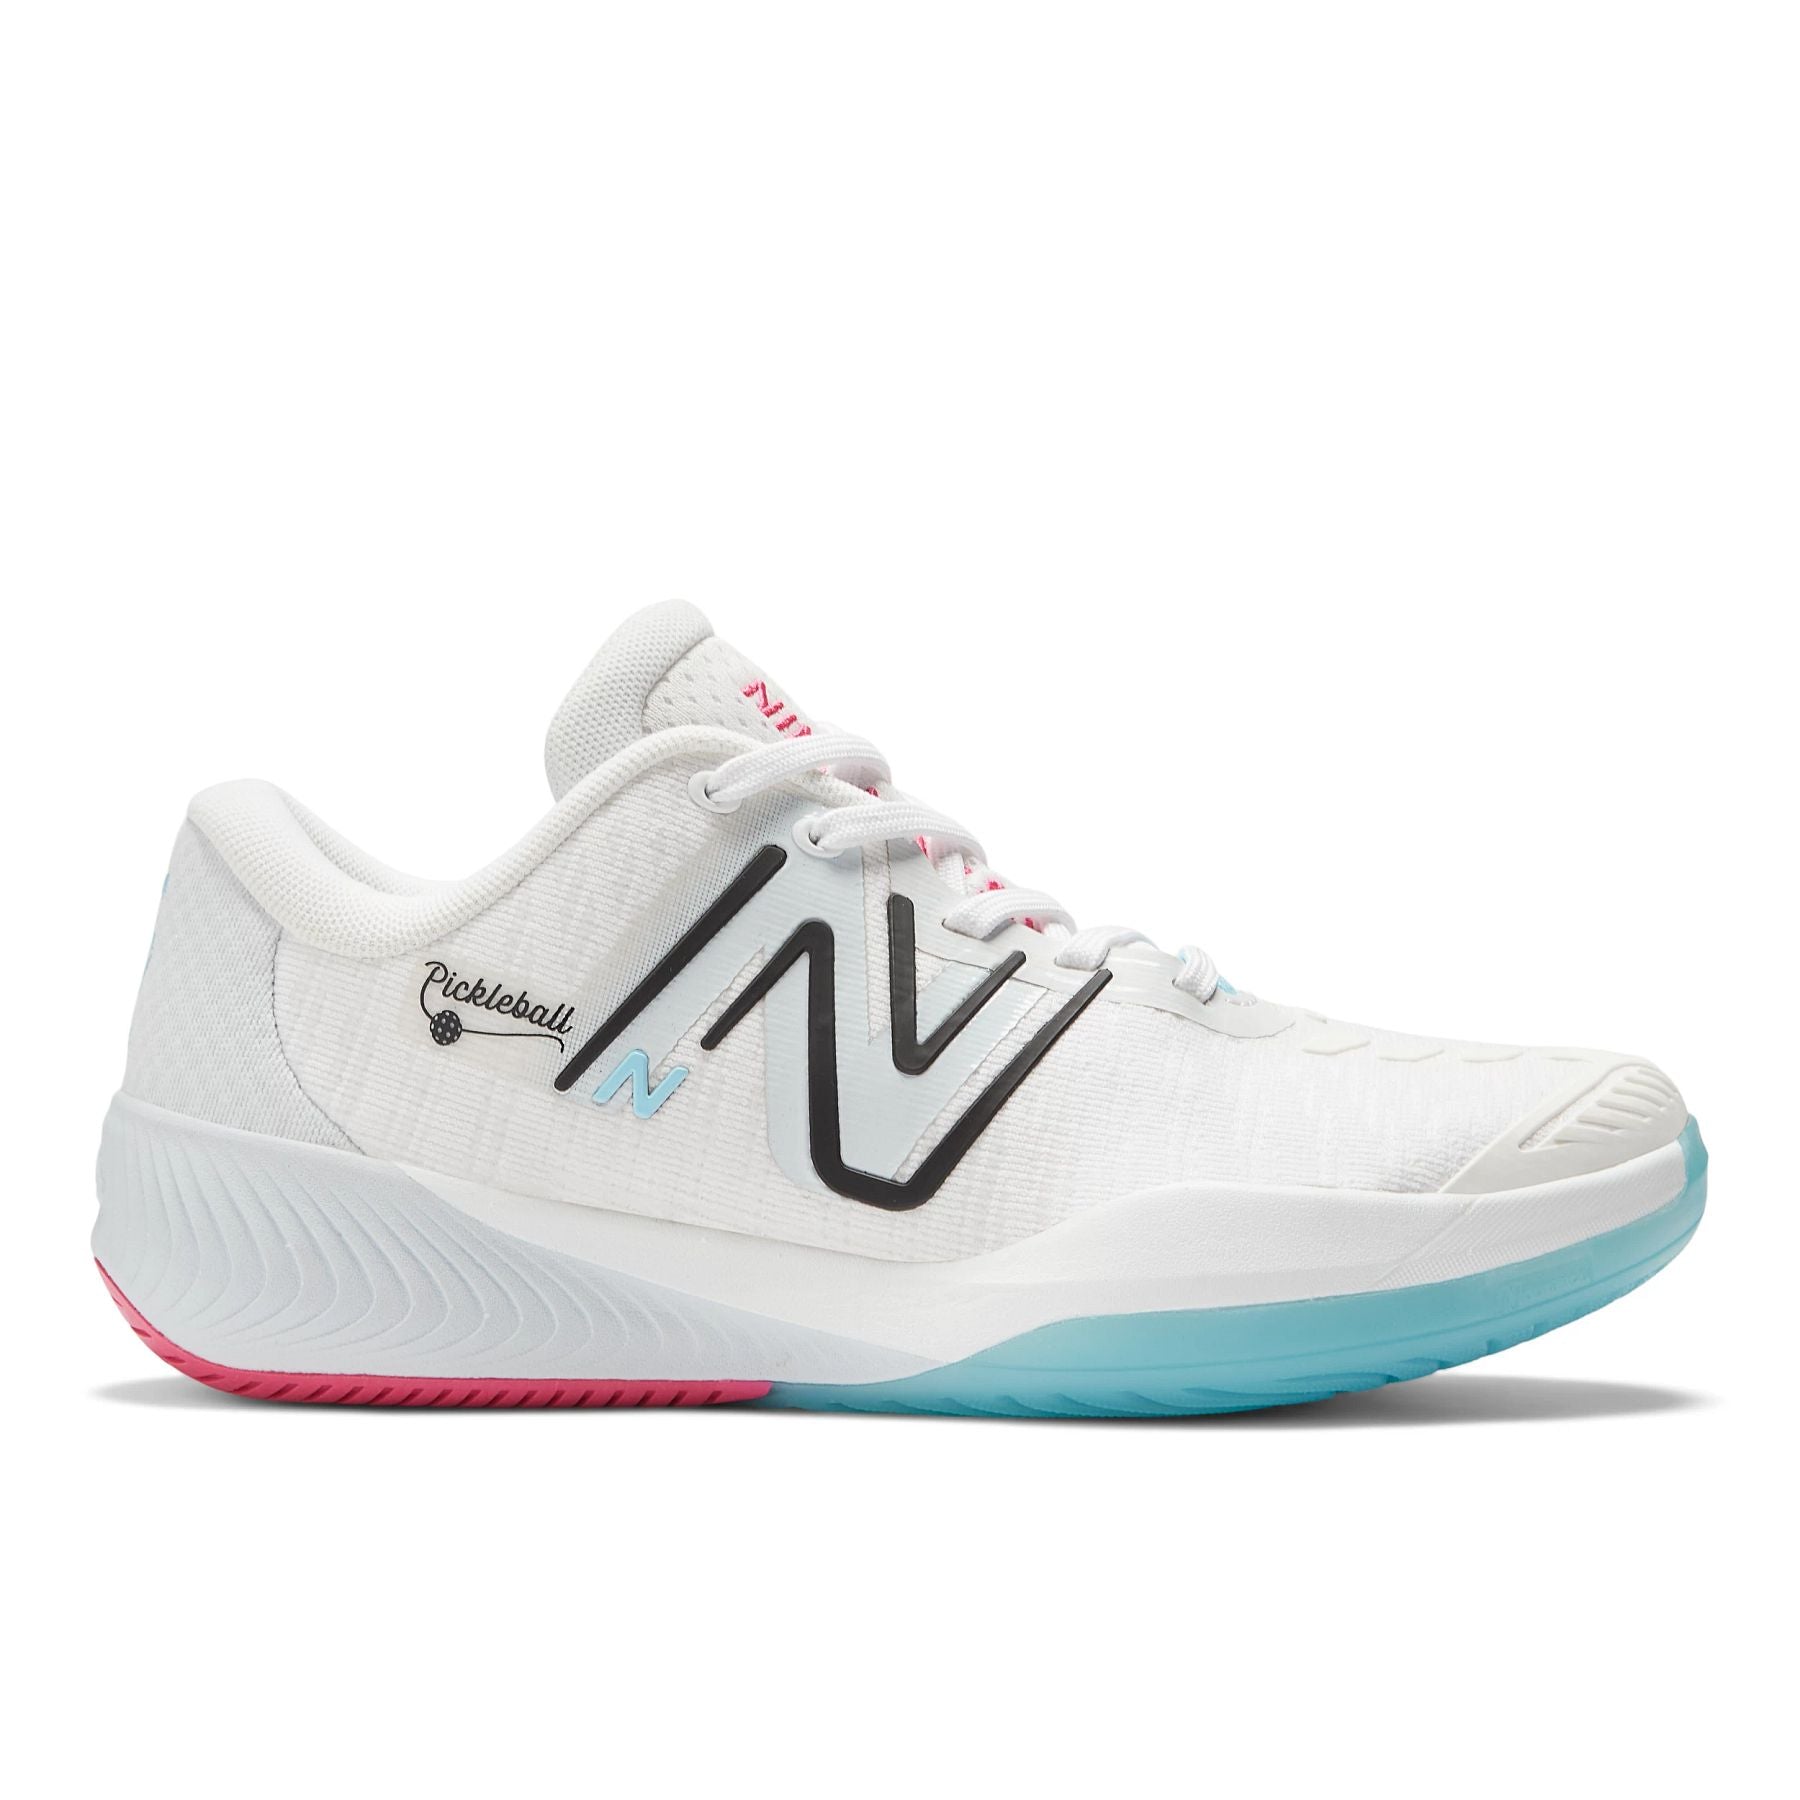 Lateral view of the Women's Fuel Cell 996 V5 New Balance Pickleball shoe in White with grey and team red